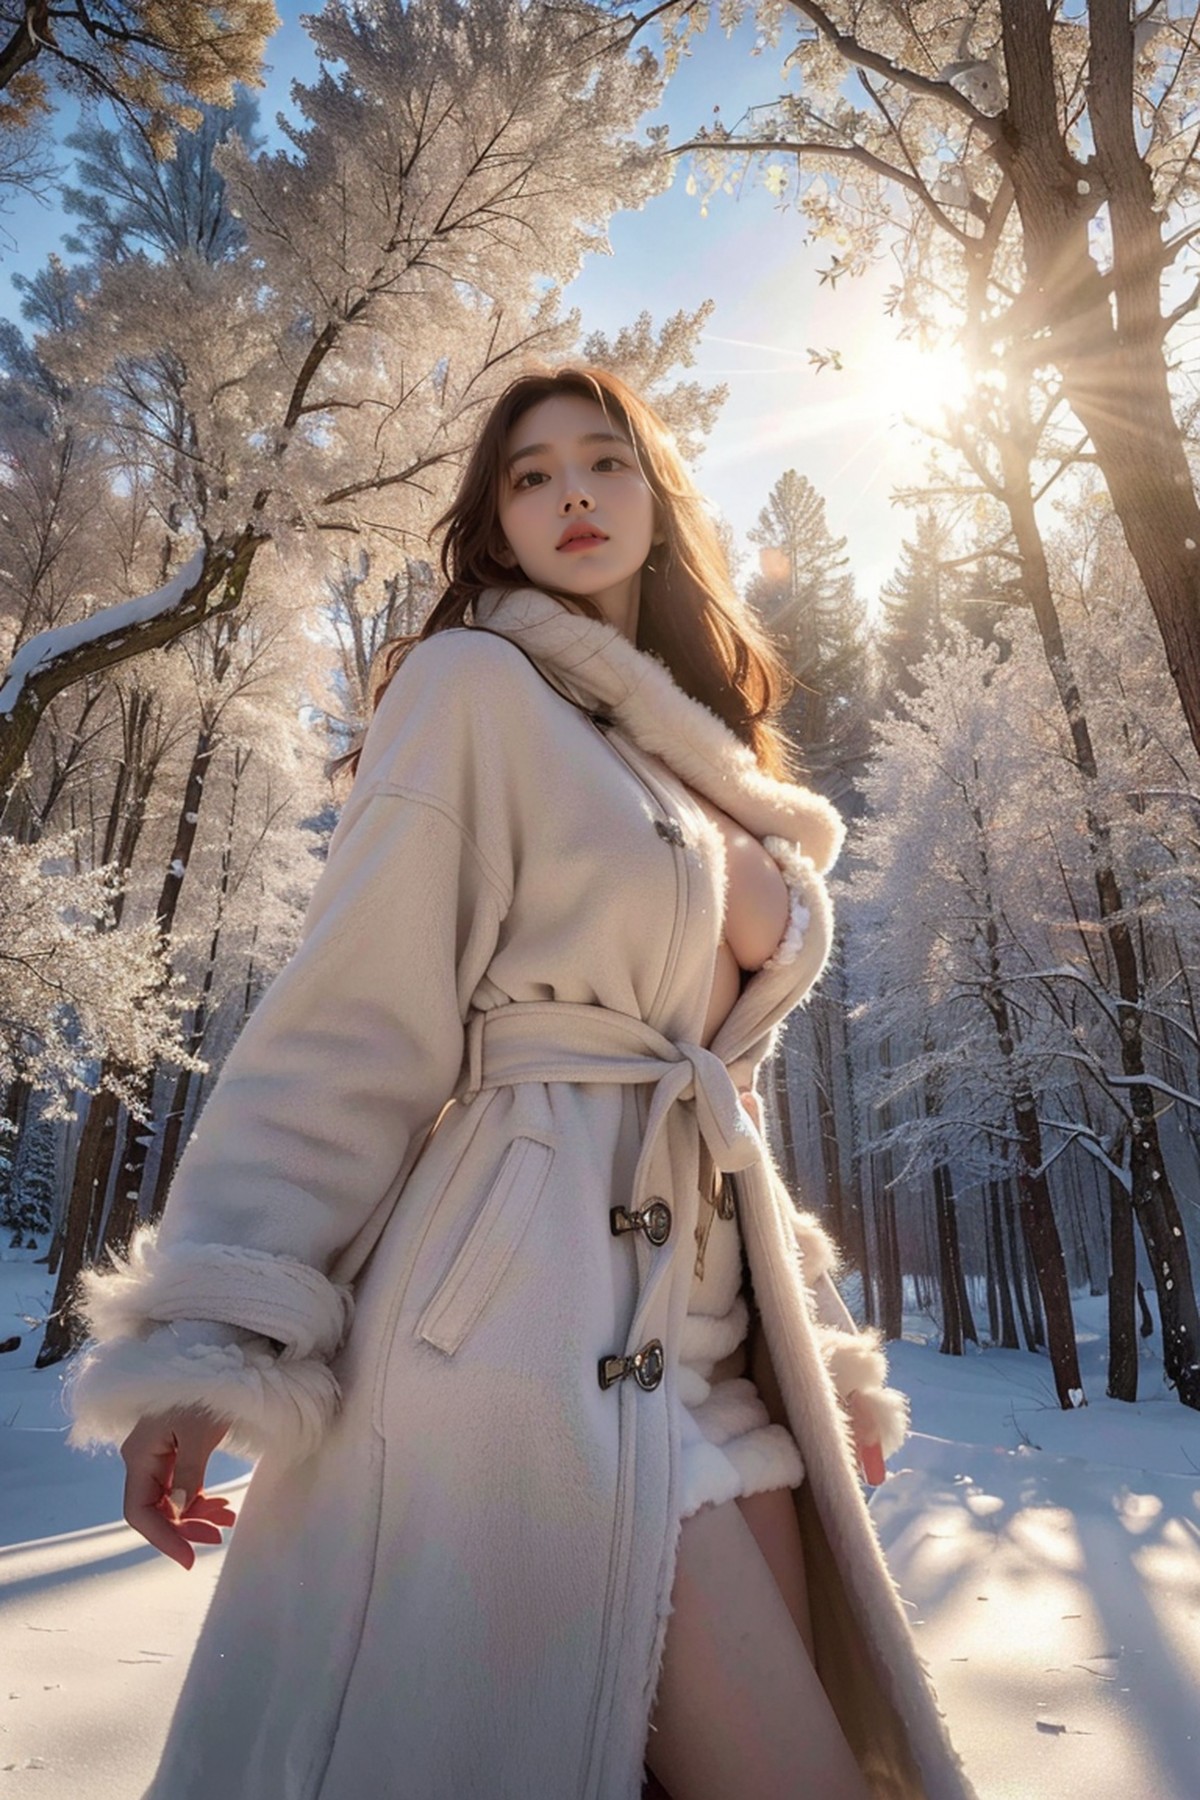 General 1200x1800 red lipstick sunlight dress tight clothing minidress thighs winter clothing winter tree bark snow looking at viewer AI art sideboob no bra portrait display standing snow coat snow covered outdoors women outdoors parted lips brunette sky digital art fur fur trim Asian women